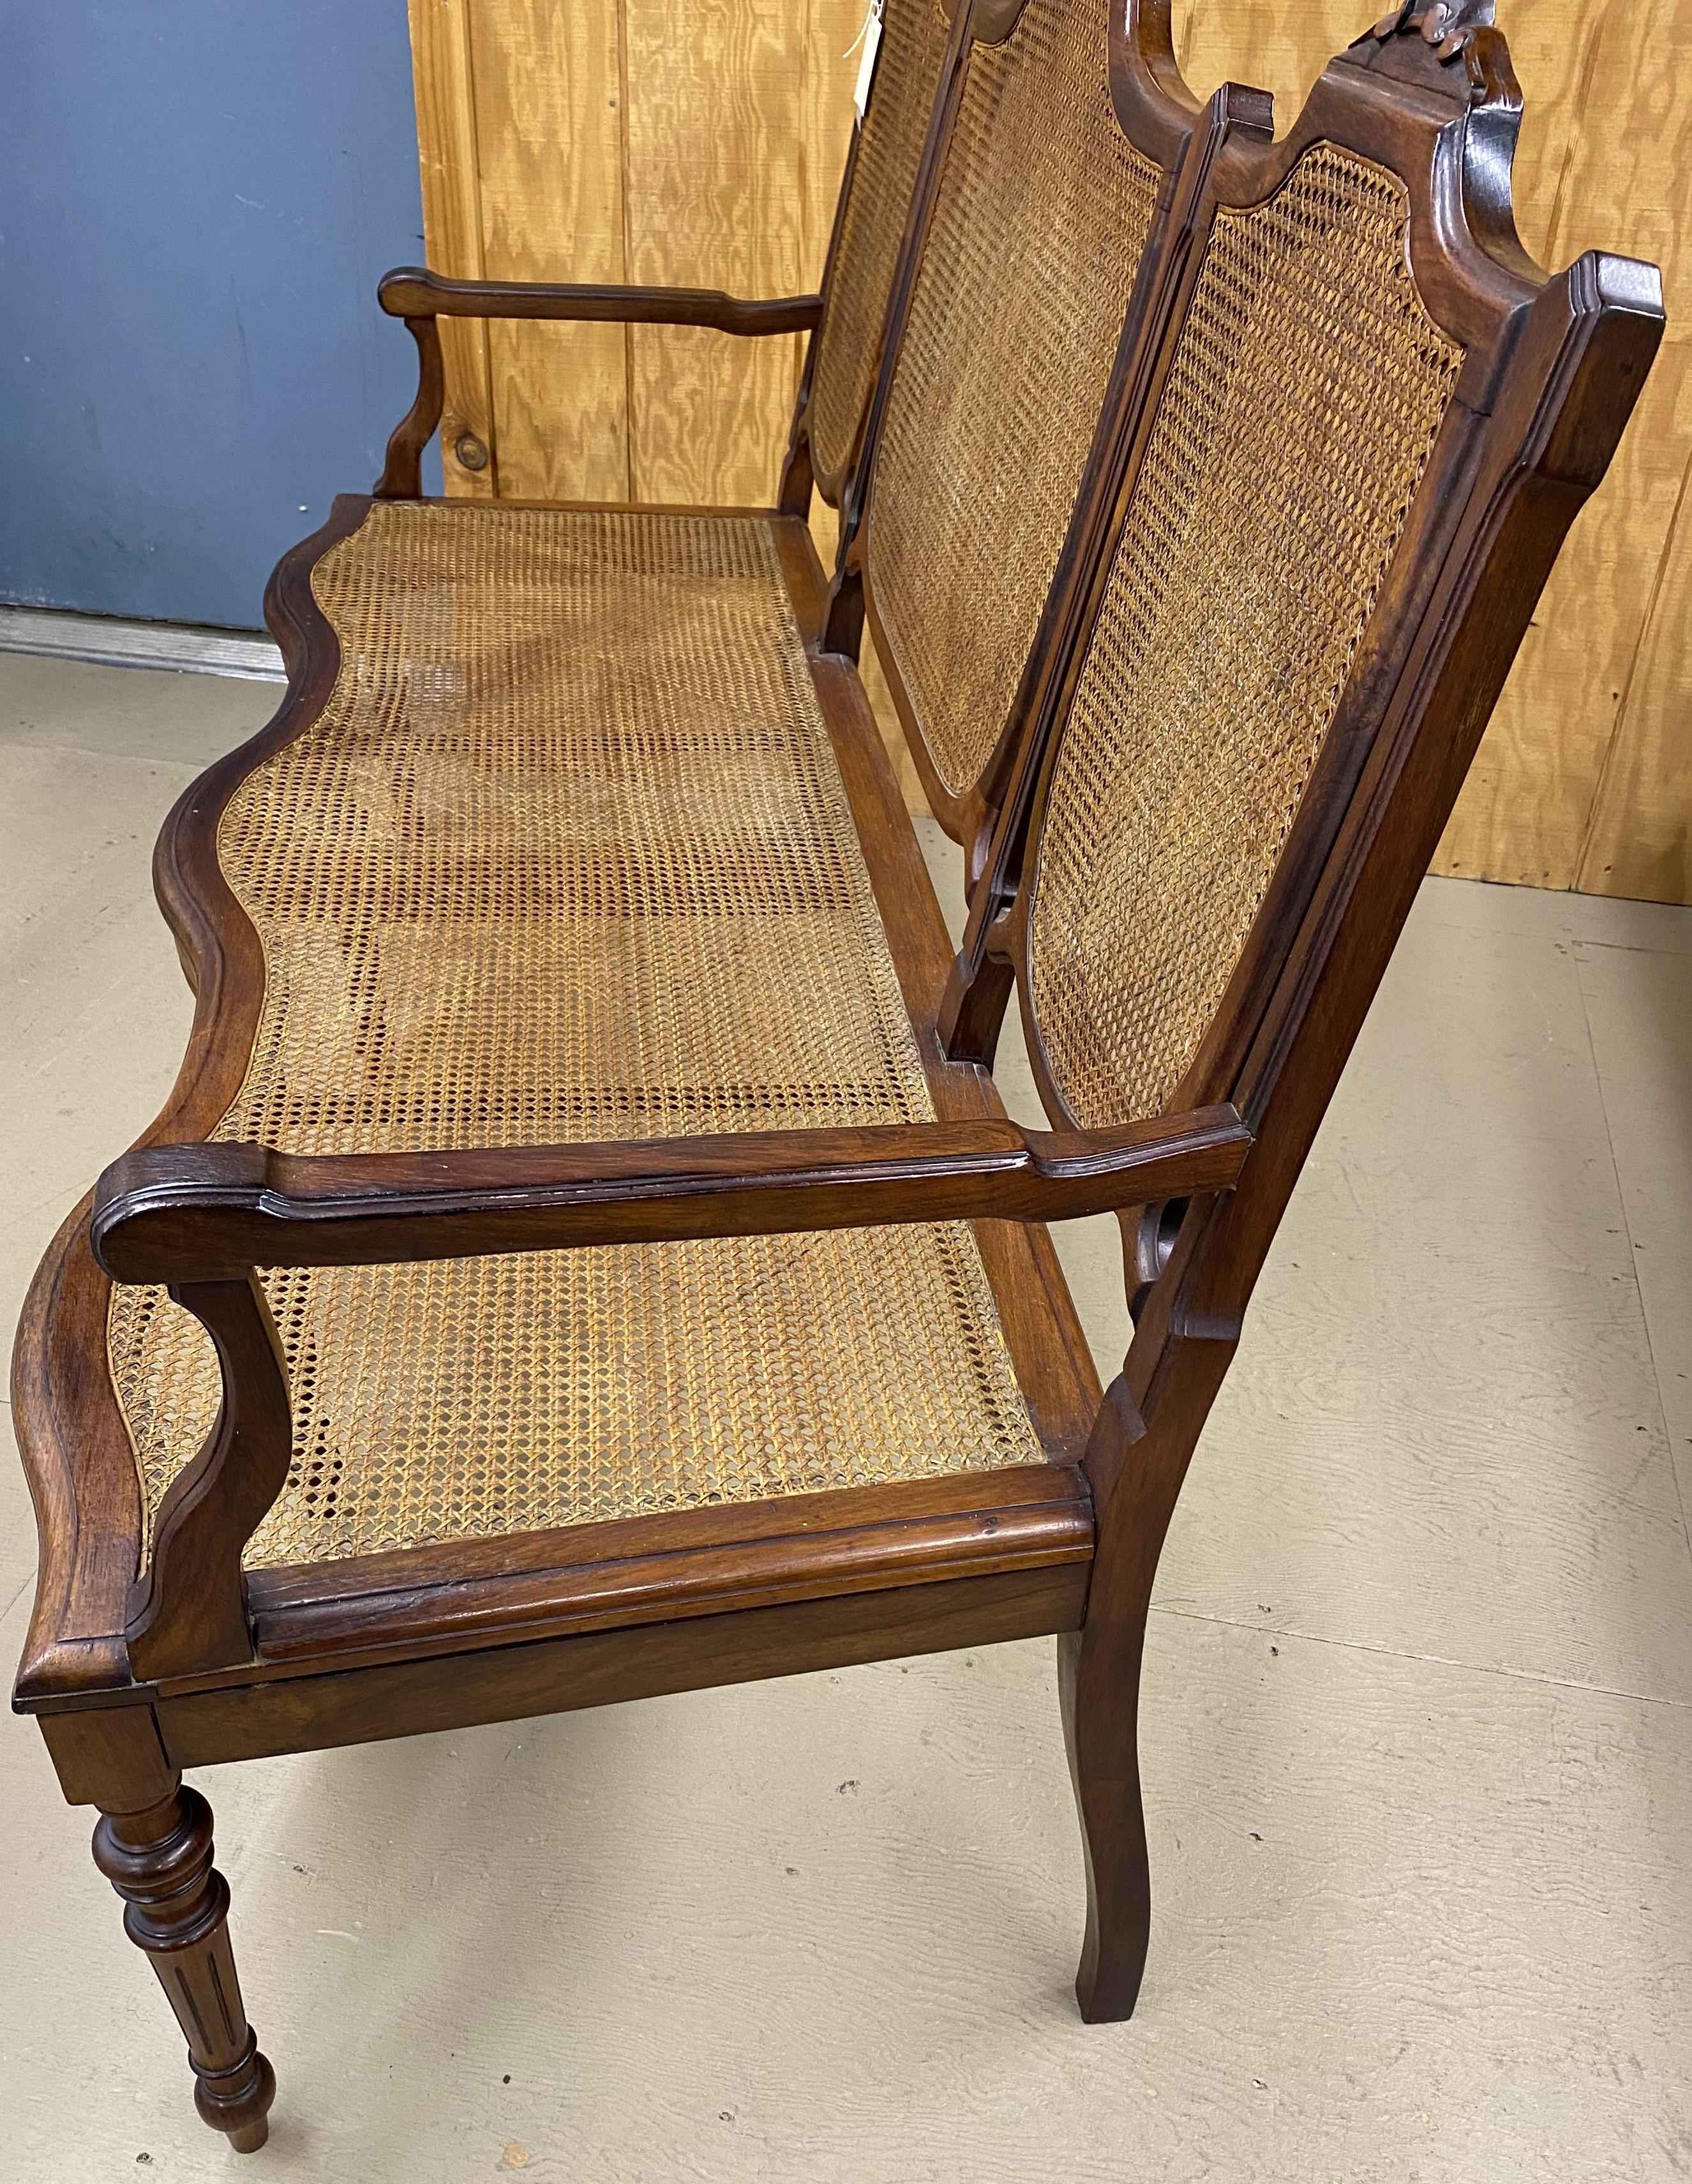 19th c Brazilian Hardwood Settee with Caned Seat and Back For Sale 6